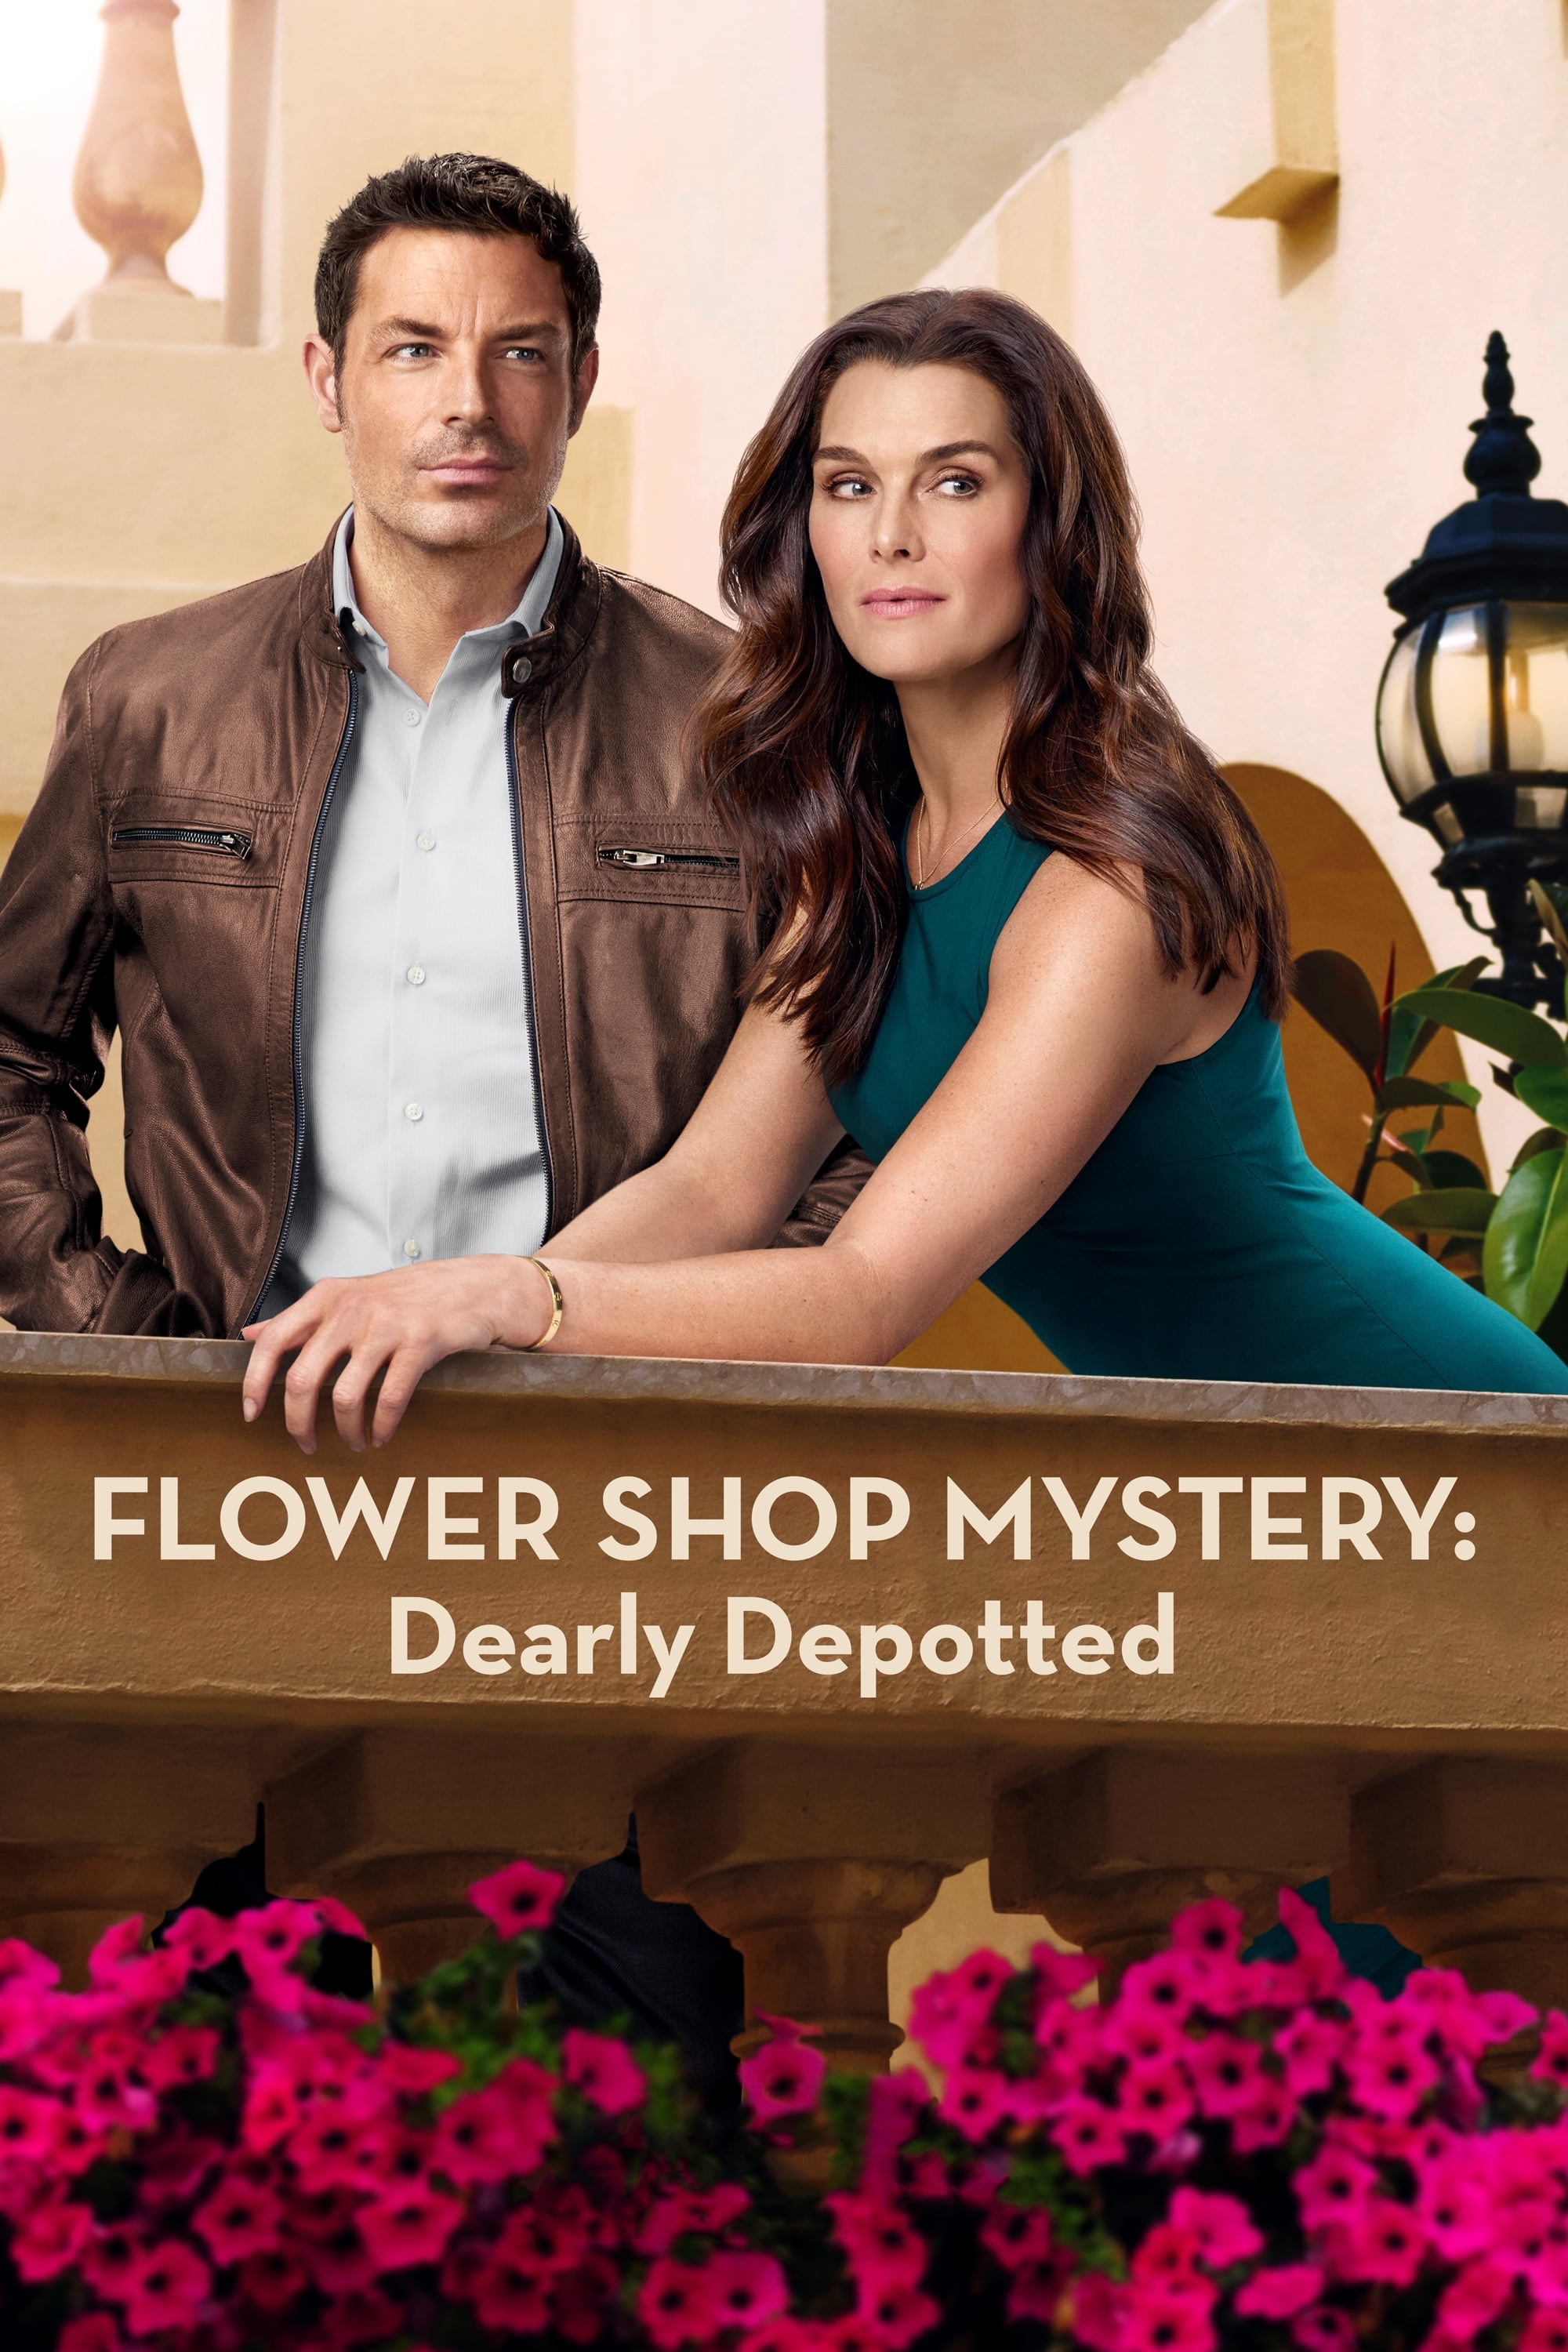 Flower Shop Mystery: Dearly Depotted  2016